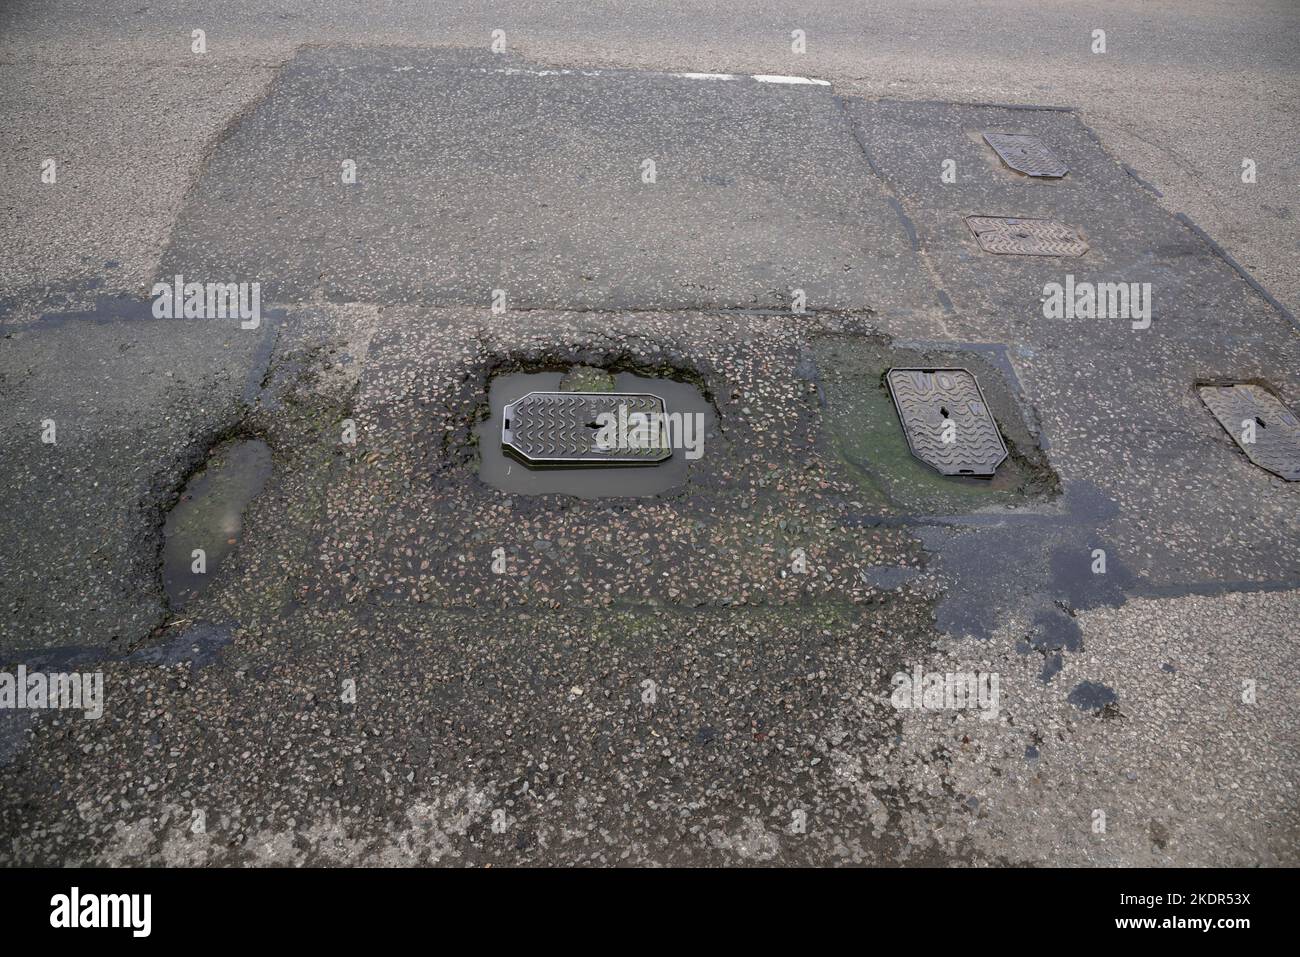 Wash out WO hydrant cover with damage to road surface and water leaking into damaged area Stock Photo